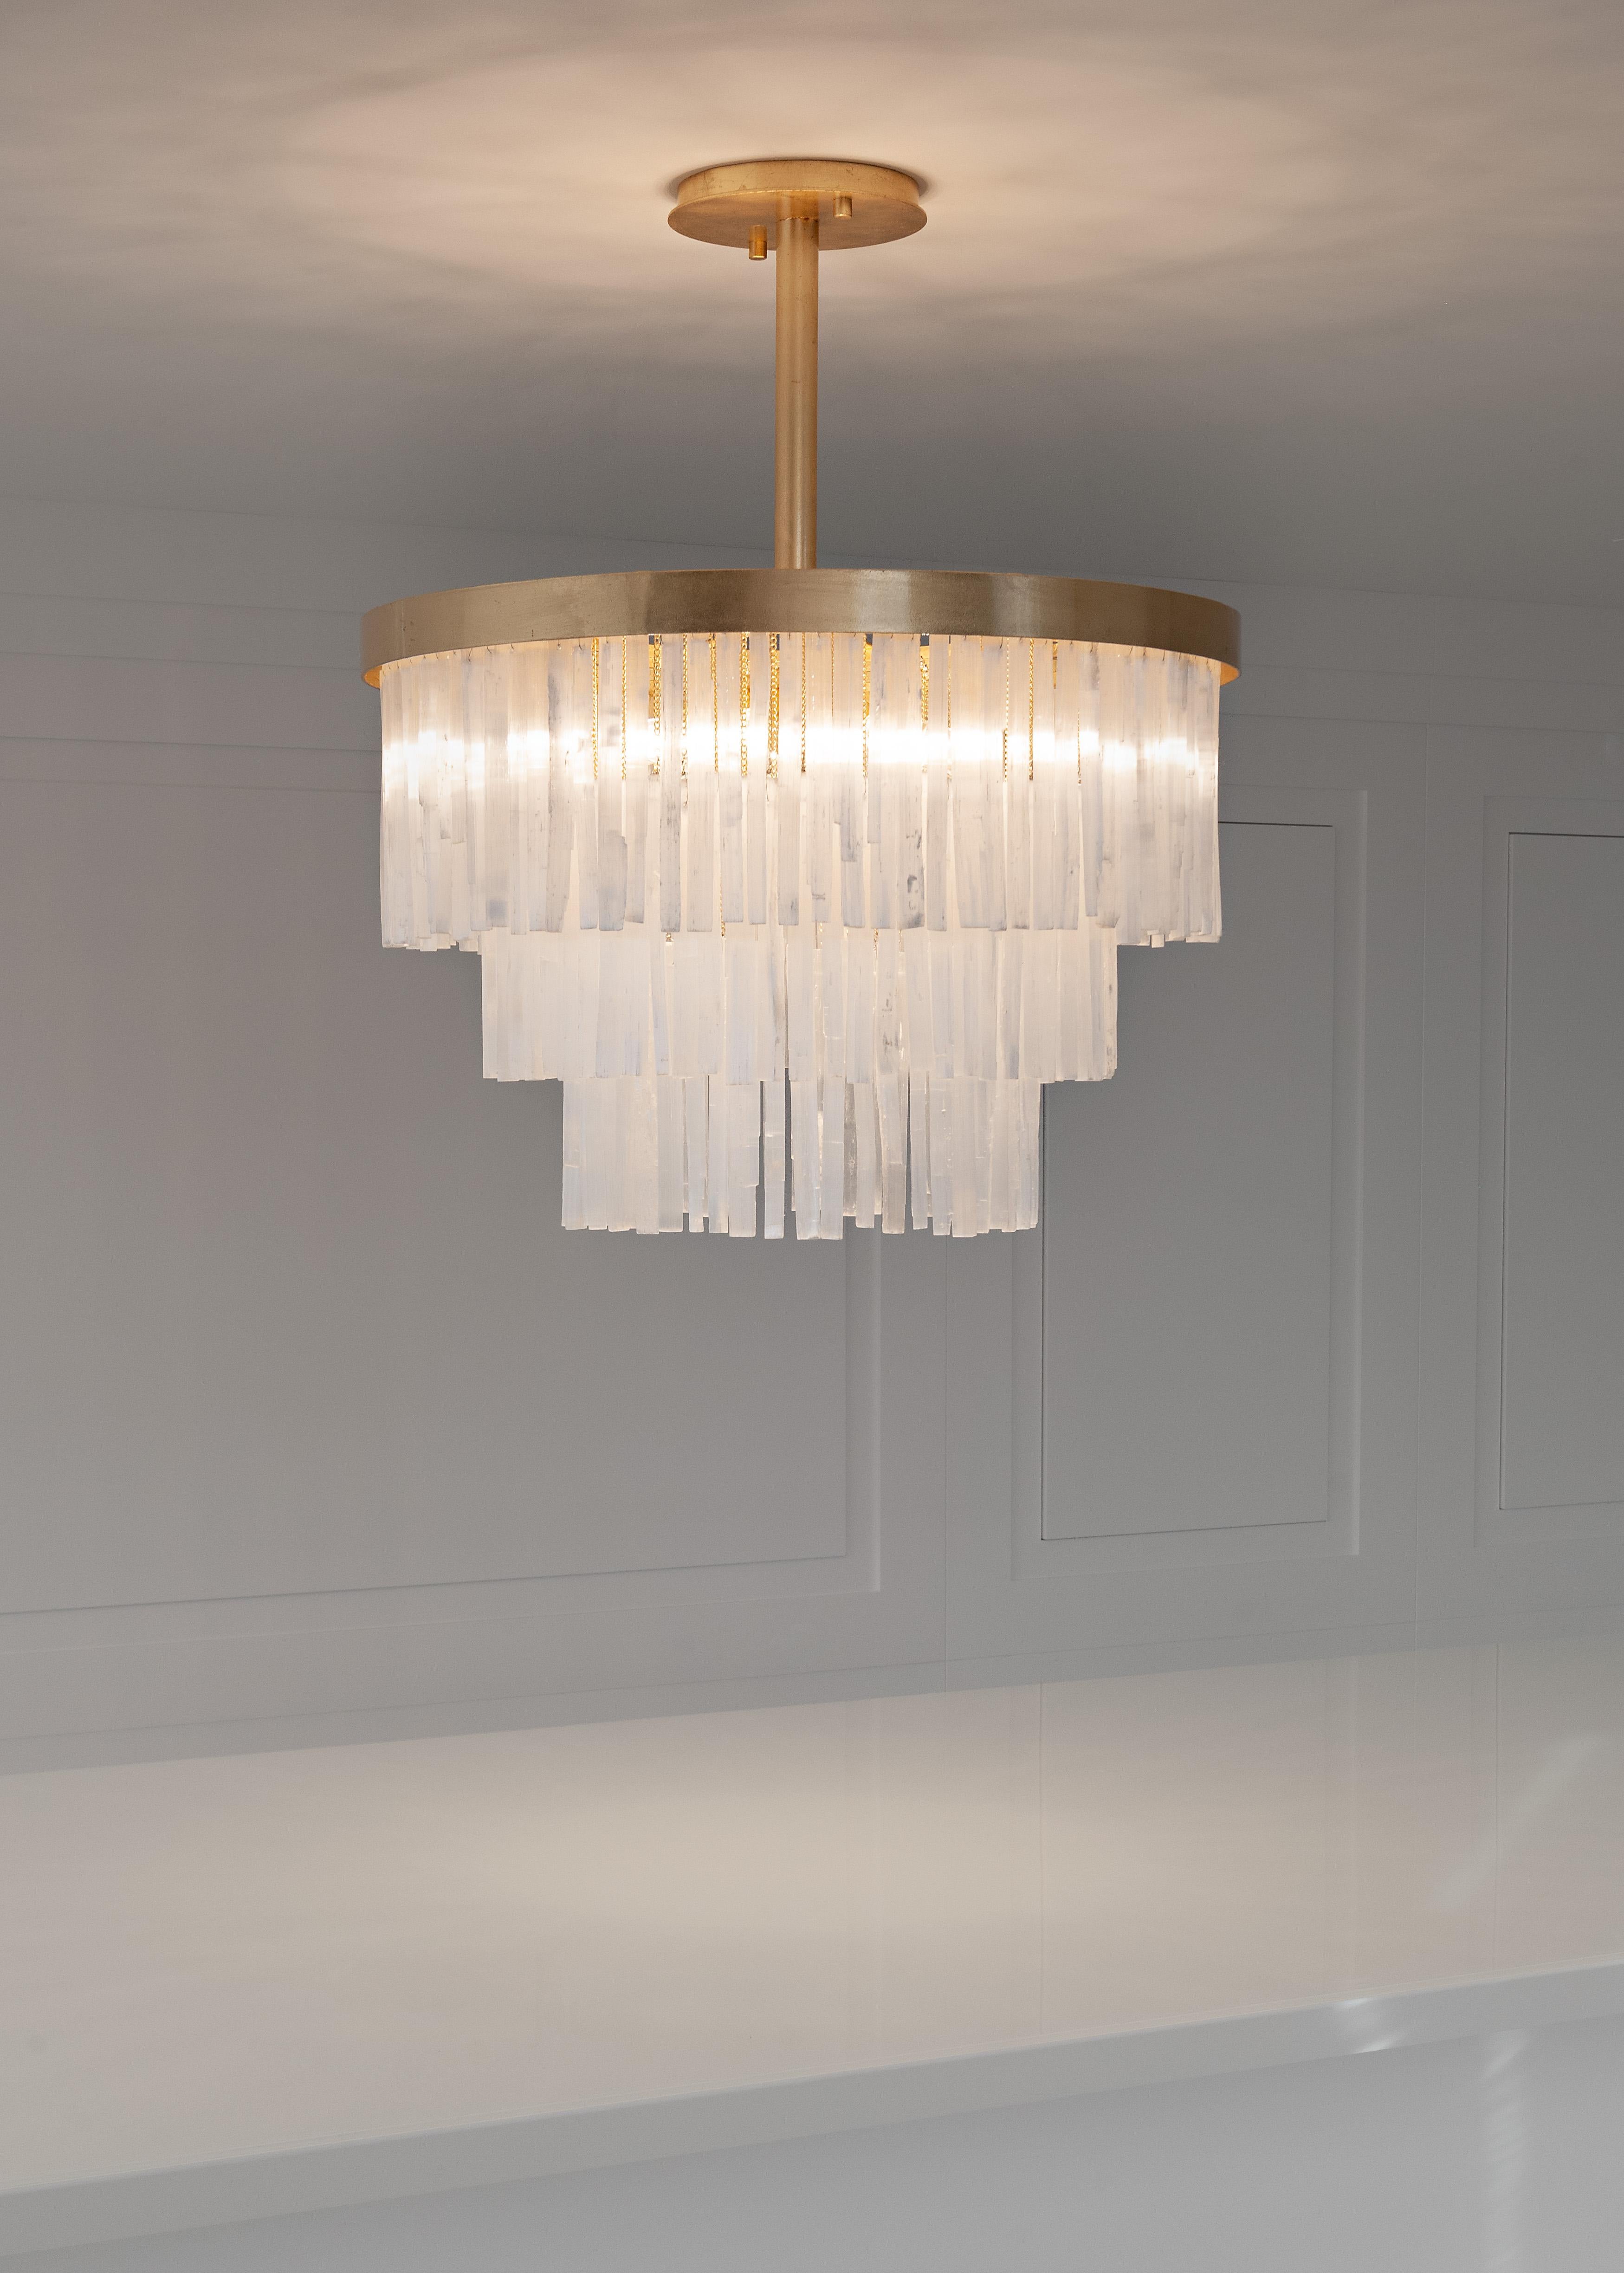 Selenite chandelier by Aver
Dimensions: 80 x 80 x 60 cm.
Materials: aluminum and selenite.

Designed by Marcele Muraro, it is made of natural stones and inspired by the city of Casablanca, which has a rich Art Deco architectural heritage. Straight